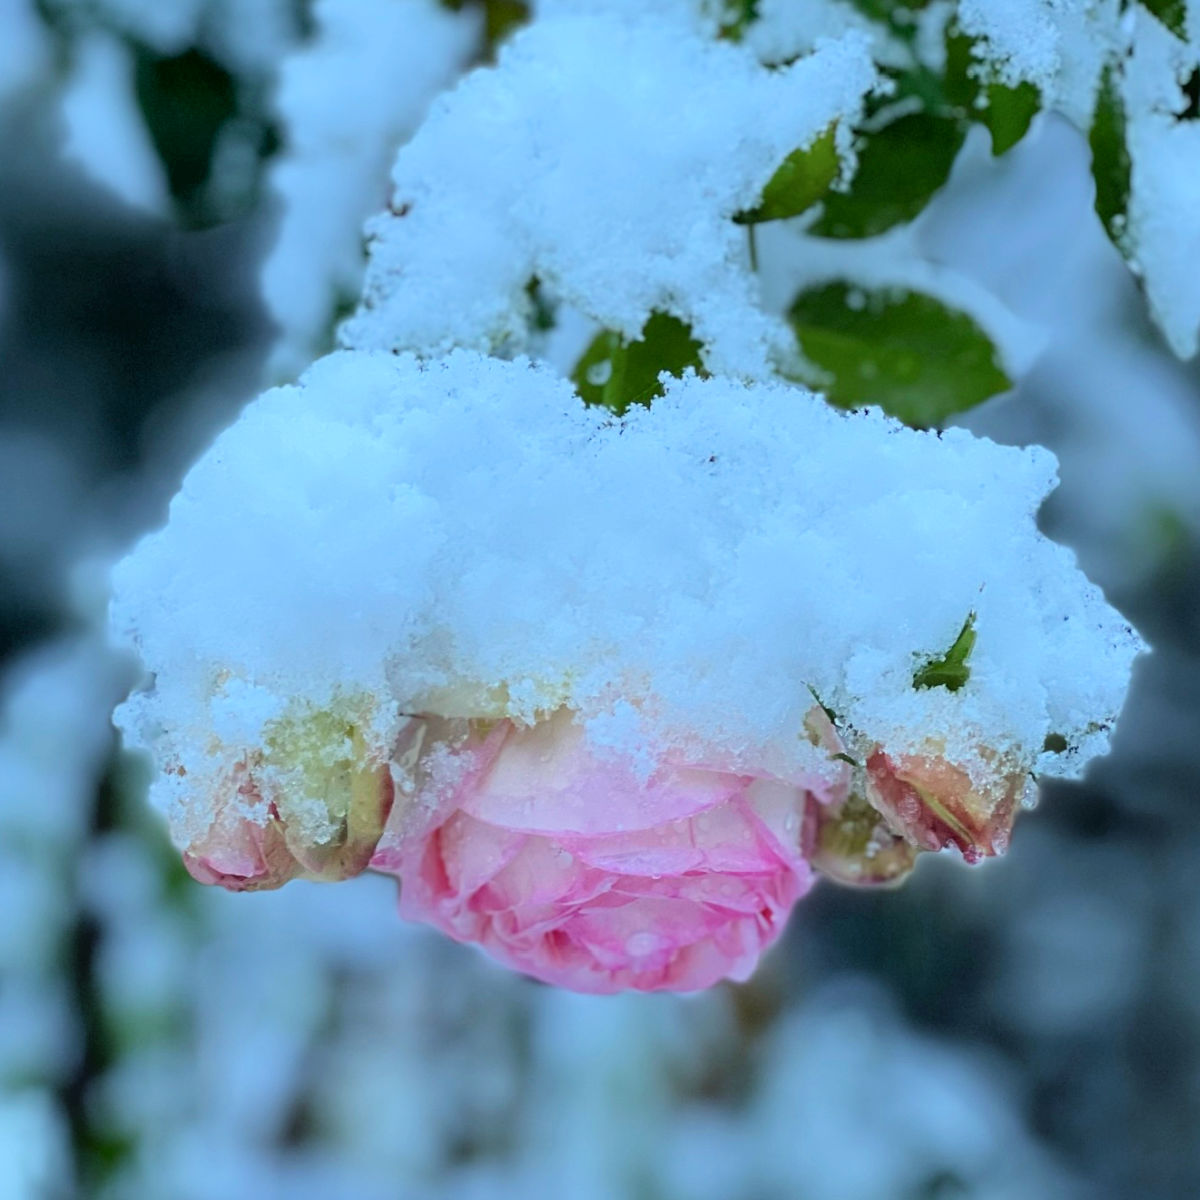 7 easy Tips for Winterizing Roses – How To Protect and Care